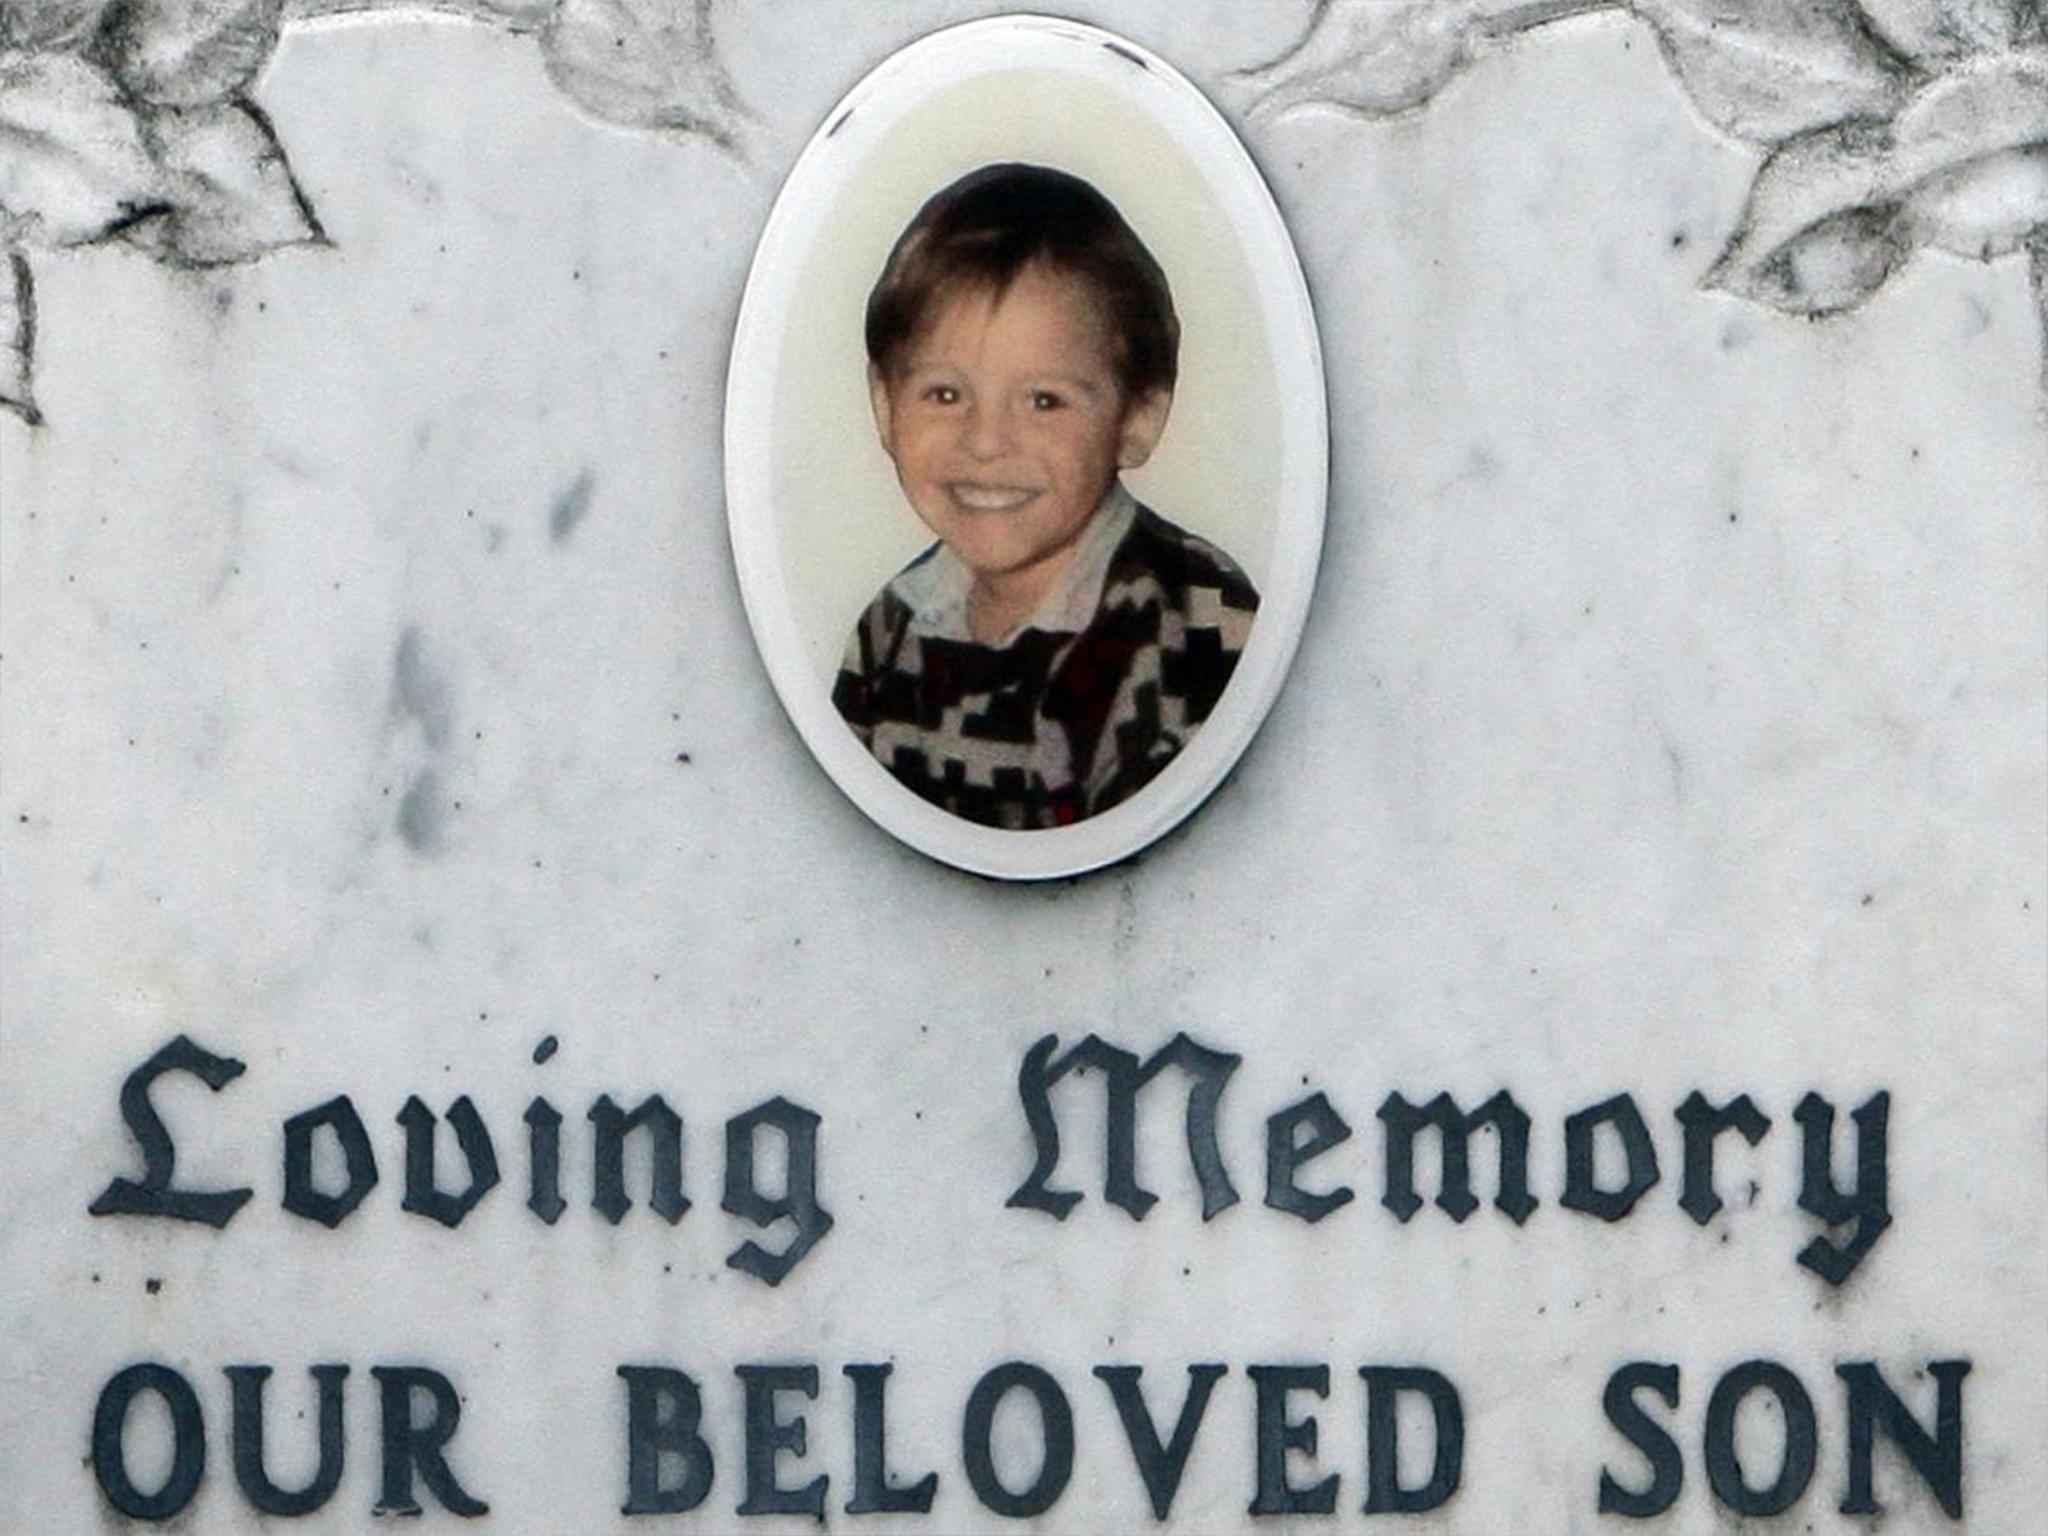 The grave of James Bulger